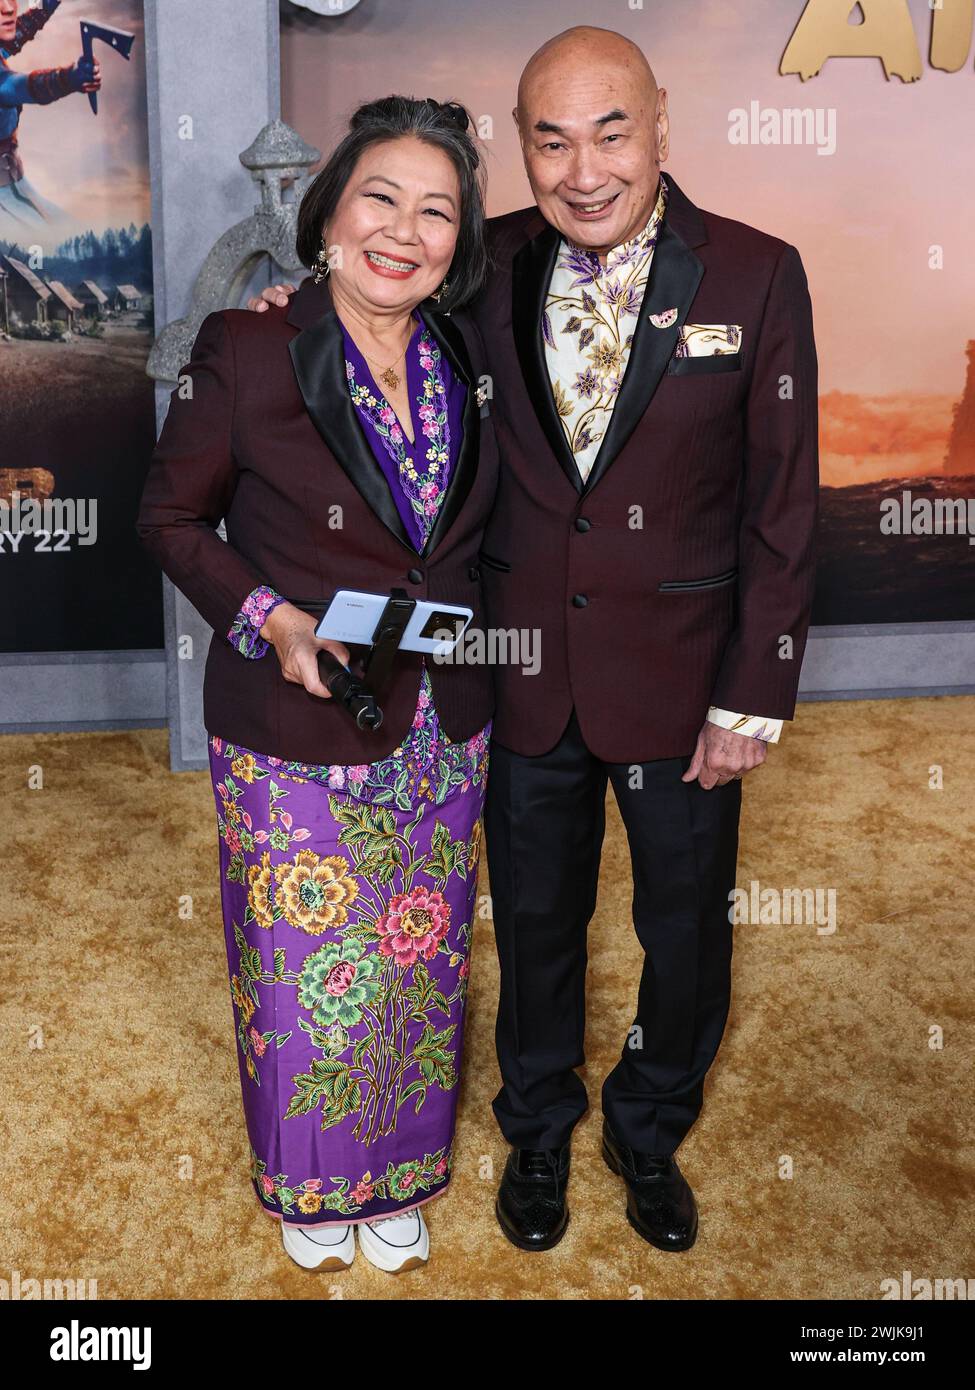 HOLLYWOOD, LOS ANGELES, CALIFORNIA, USA - FEBRUARY 15: Neo Swee Lin and husband Lim Kay Siu arrive at the World Premiere Of Netflix's 'Avatar: The Last Airbender' Season 1 held at The Egyptian Theatre Hollywood on February 15, 2024 in Hollywood, Los Angeles, California, United States. (Photo by Xavier Collin/Image Press Agency) Stock Photo